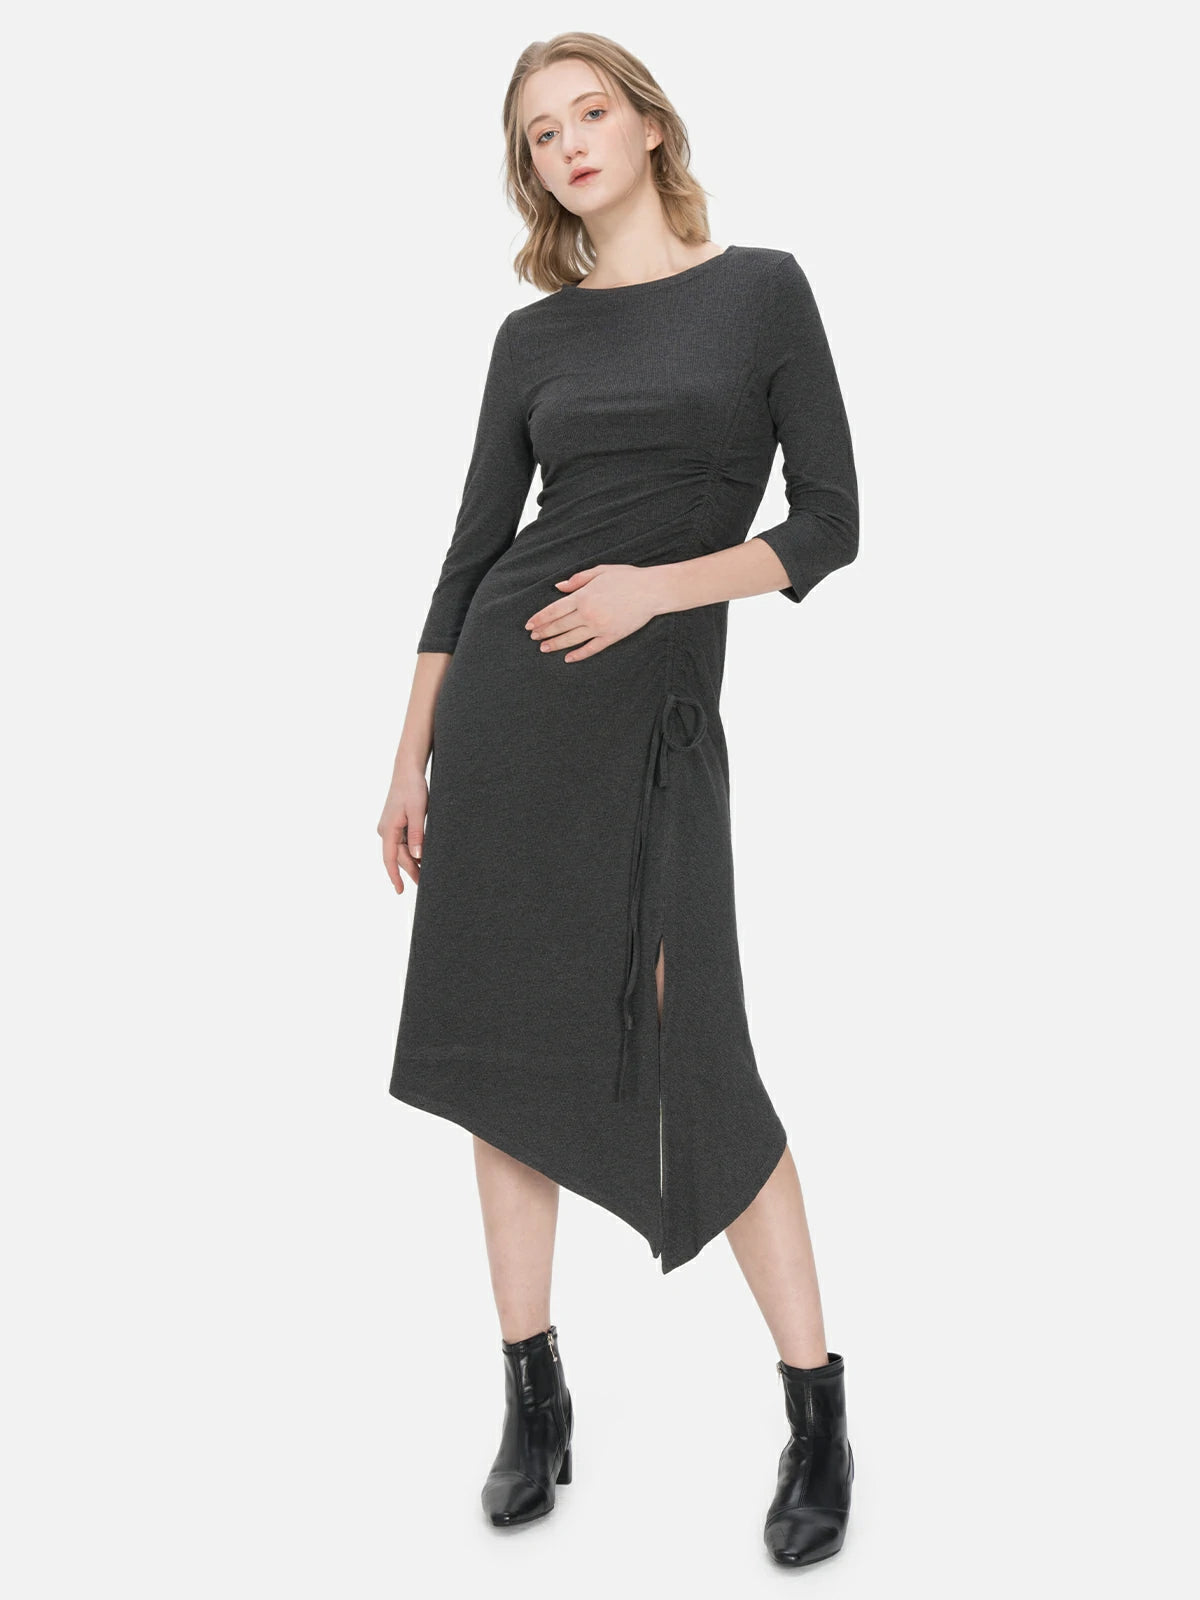 Comfortable and chic dark gray knitted dress featuring an irregular hem, side slit, and drawstring design, ensuring both a fashionable appearance and freedom of movement.